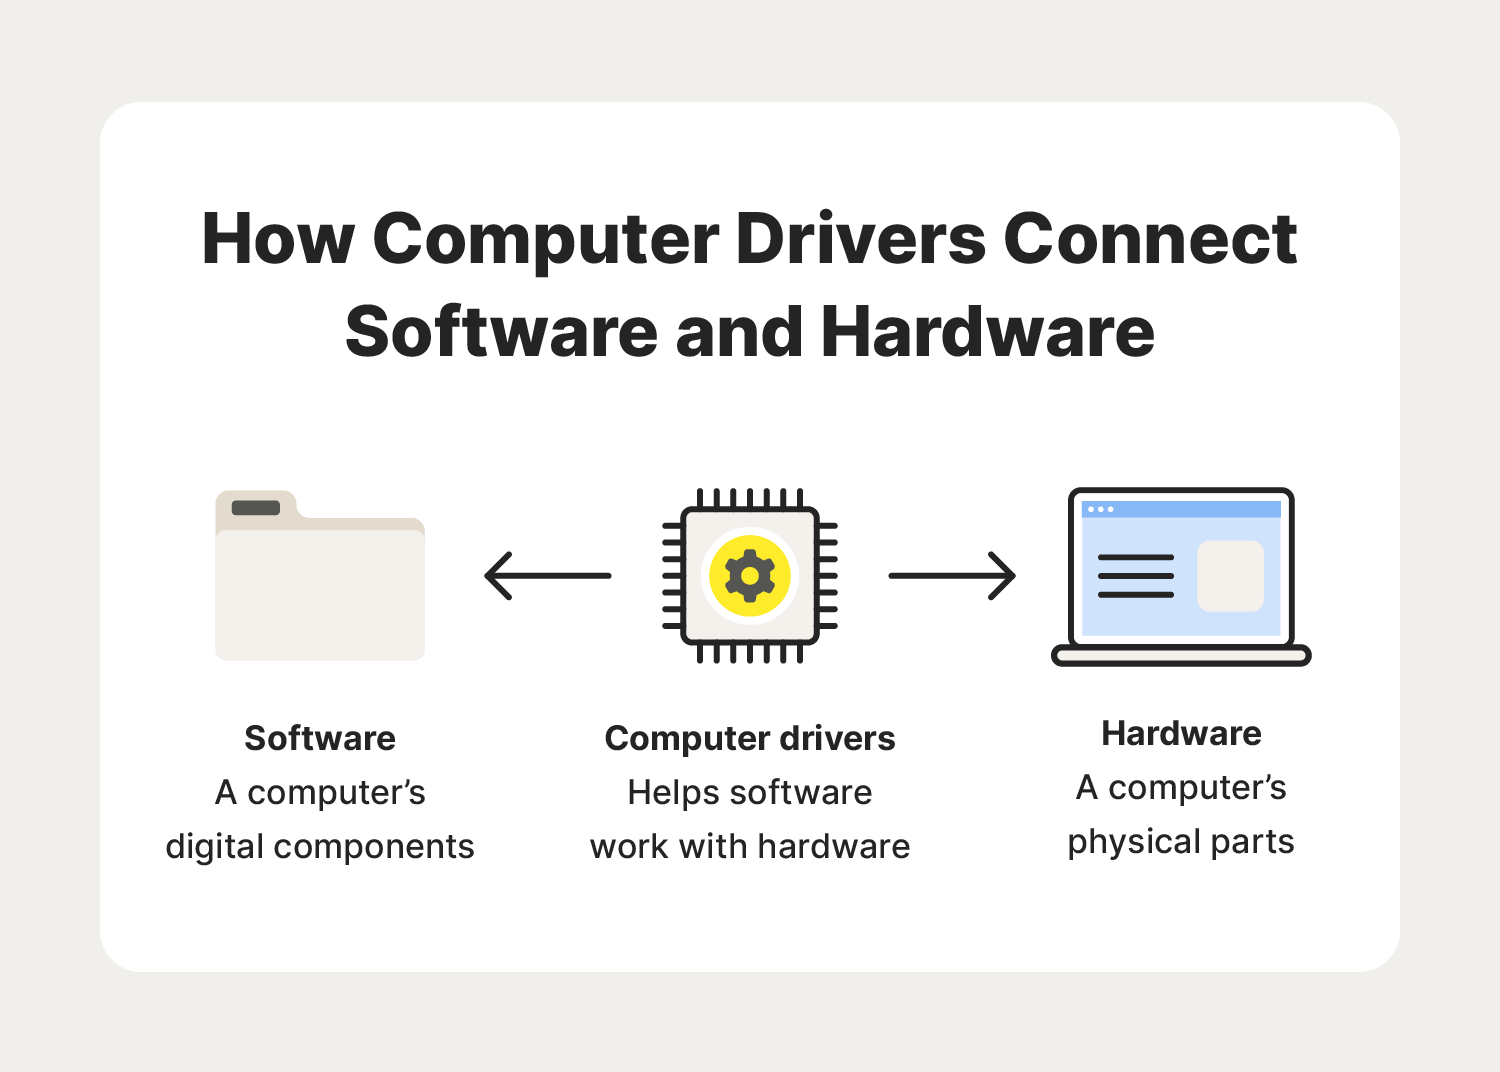 An image details how computer drivers work, answering the question, "What is a computer driver?"